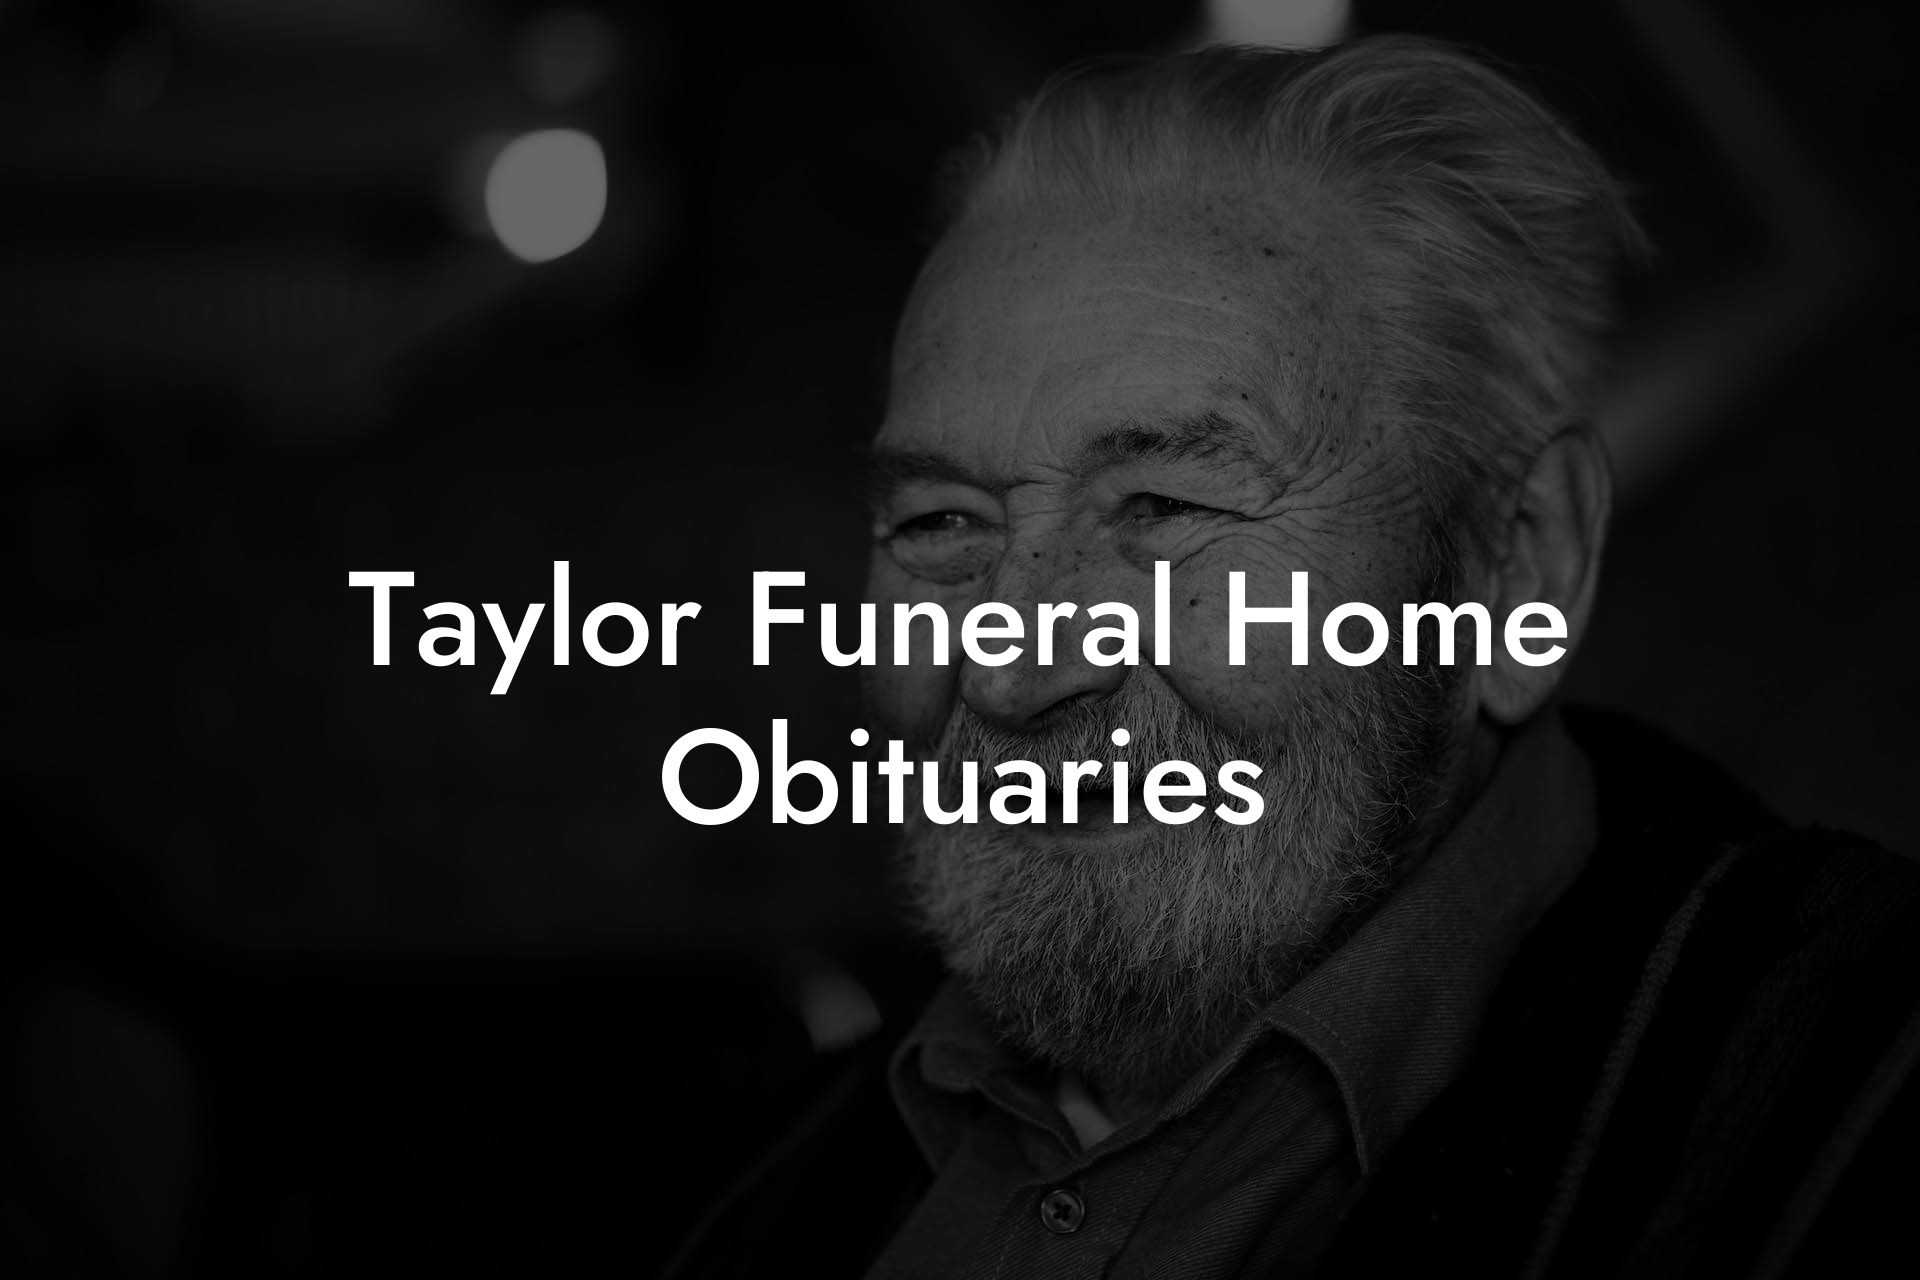 Taylor Funeral Home Obituaries